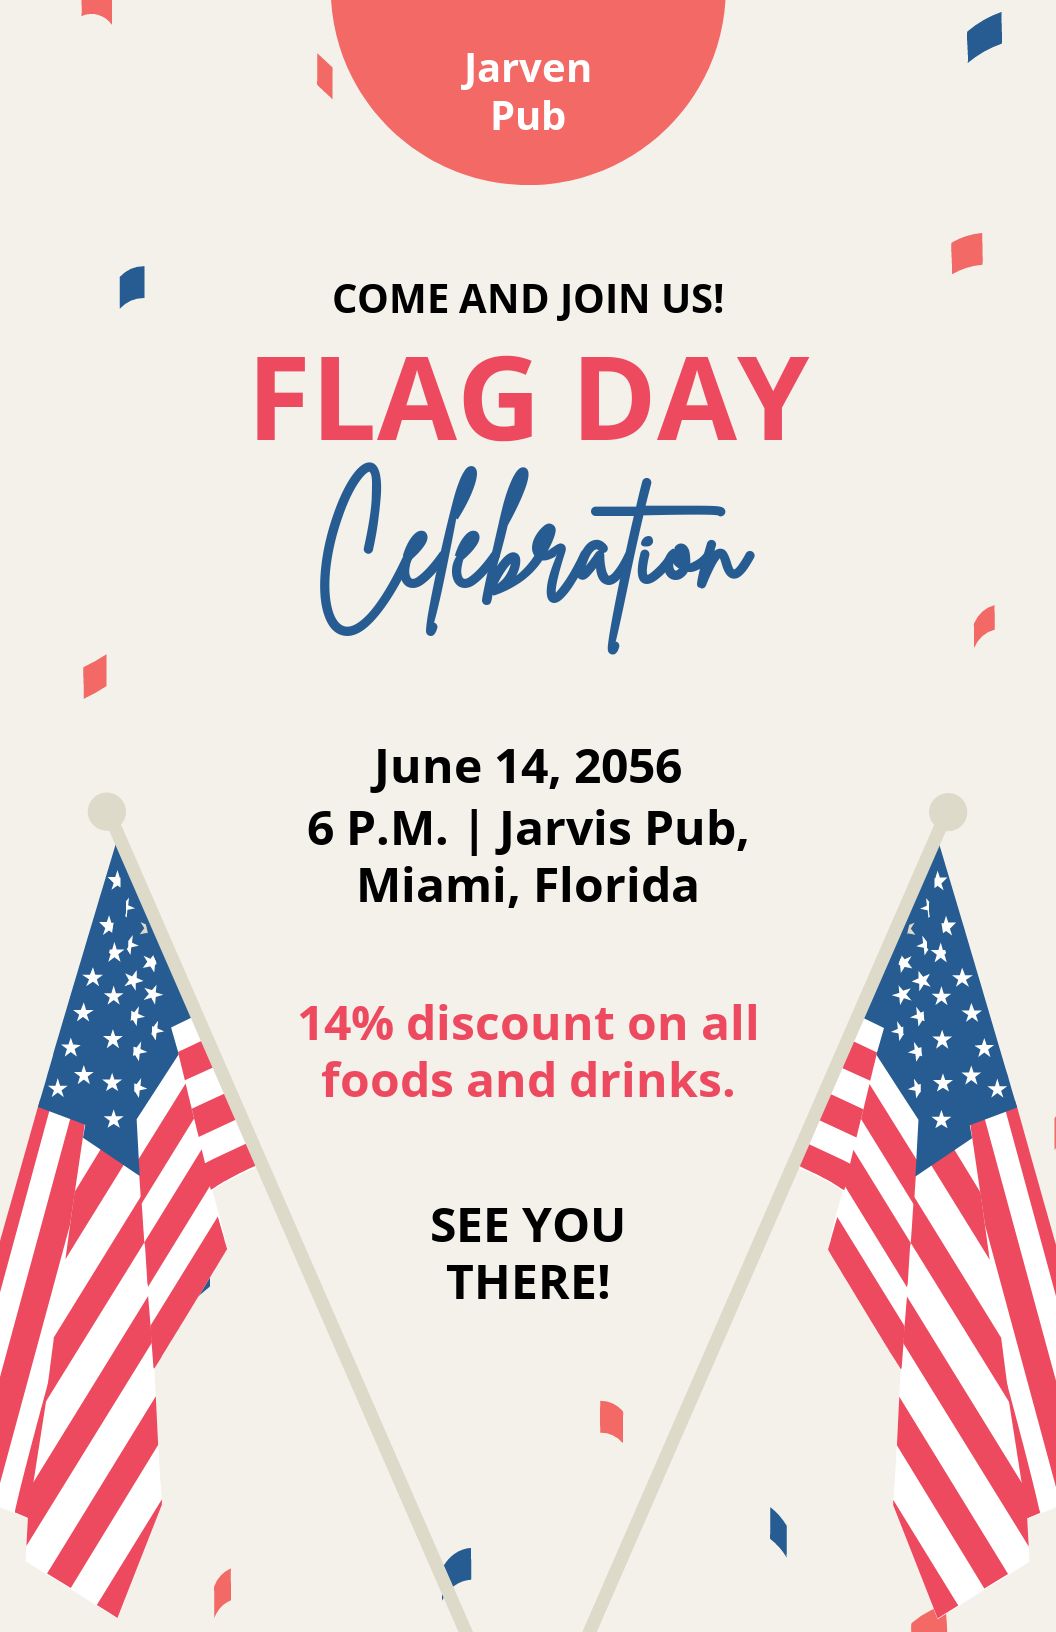 Flag Day Celebration Poster Template in Word, Google Docs, Illustrator, PSD, Apple Pages, Publisher